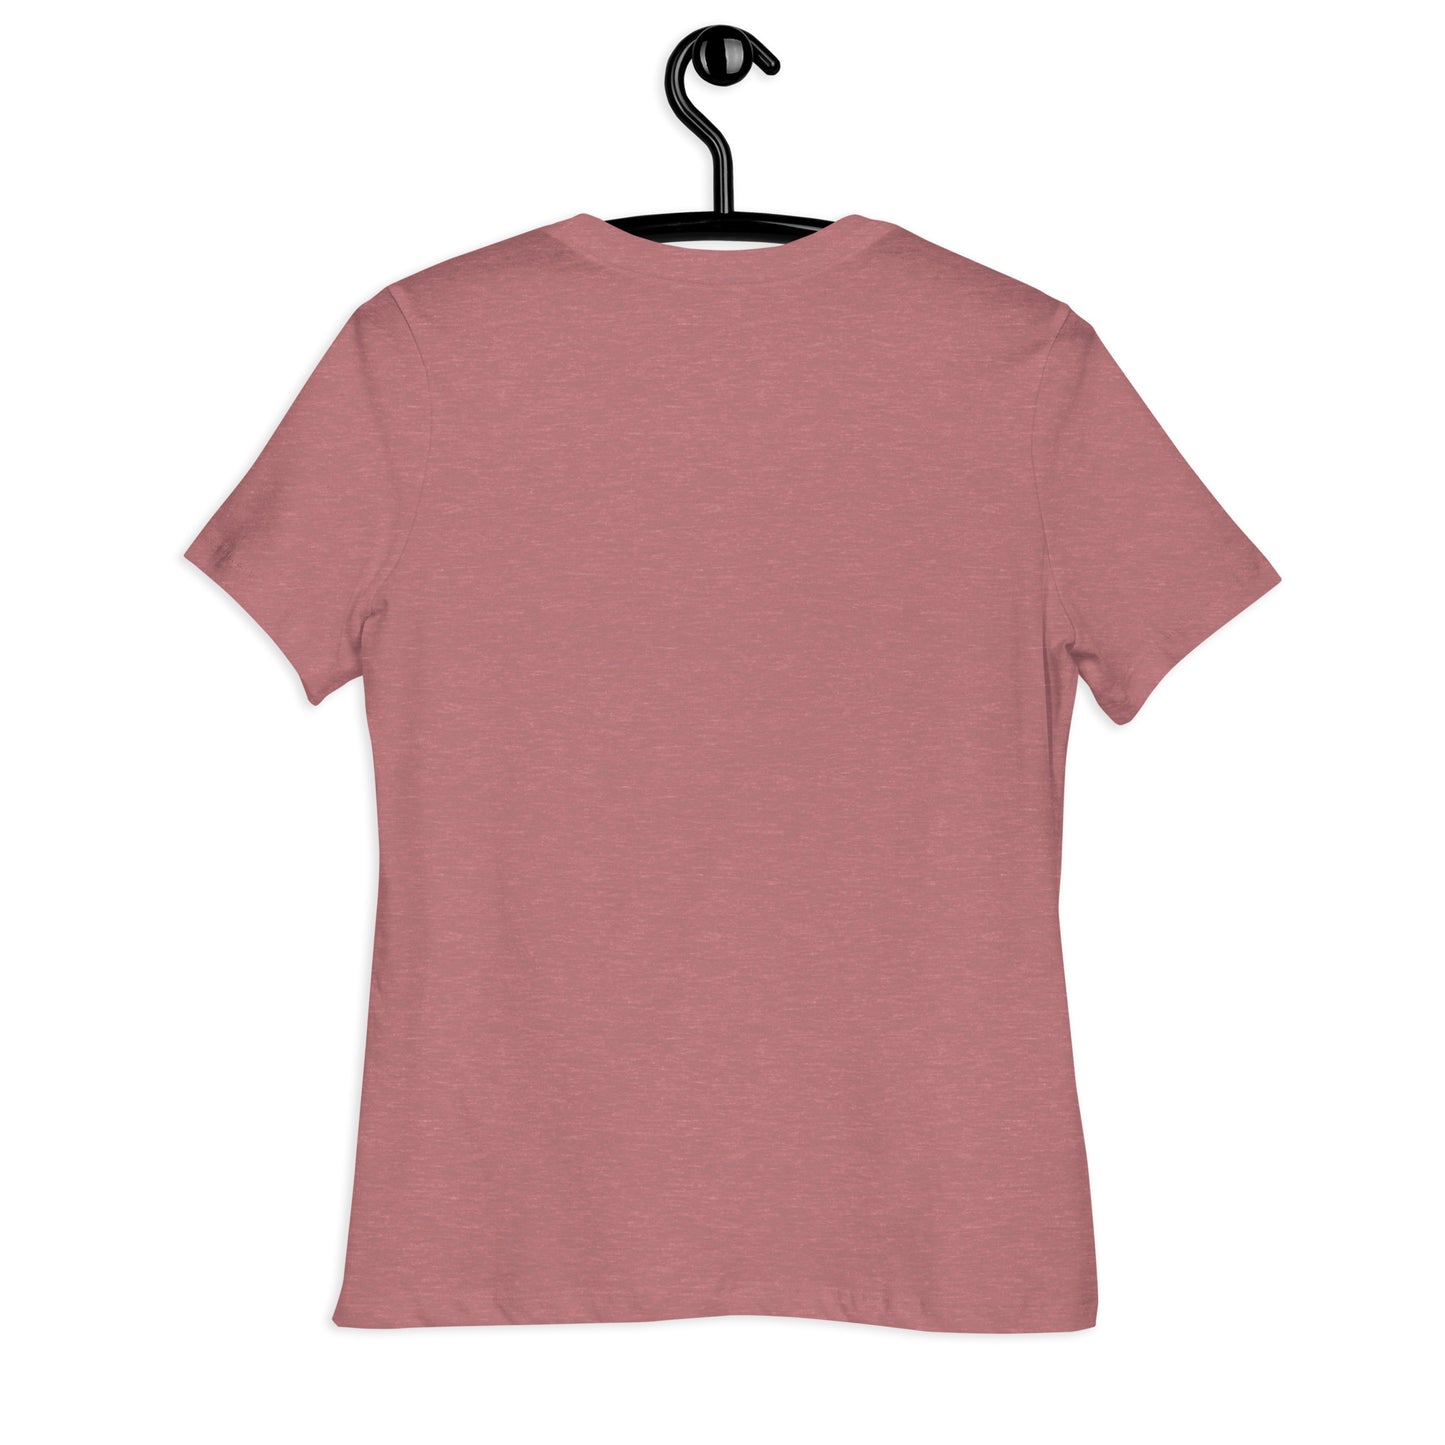 Music Therapy Quality Cotton Bella Canvas Relaxed Women's T-Shirt